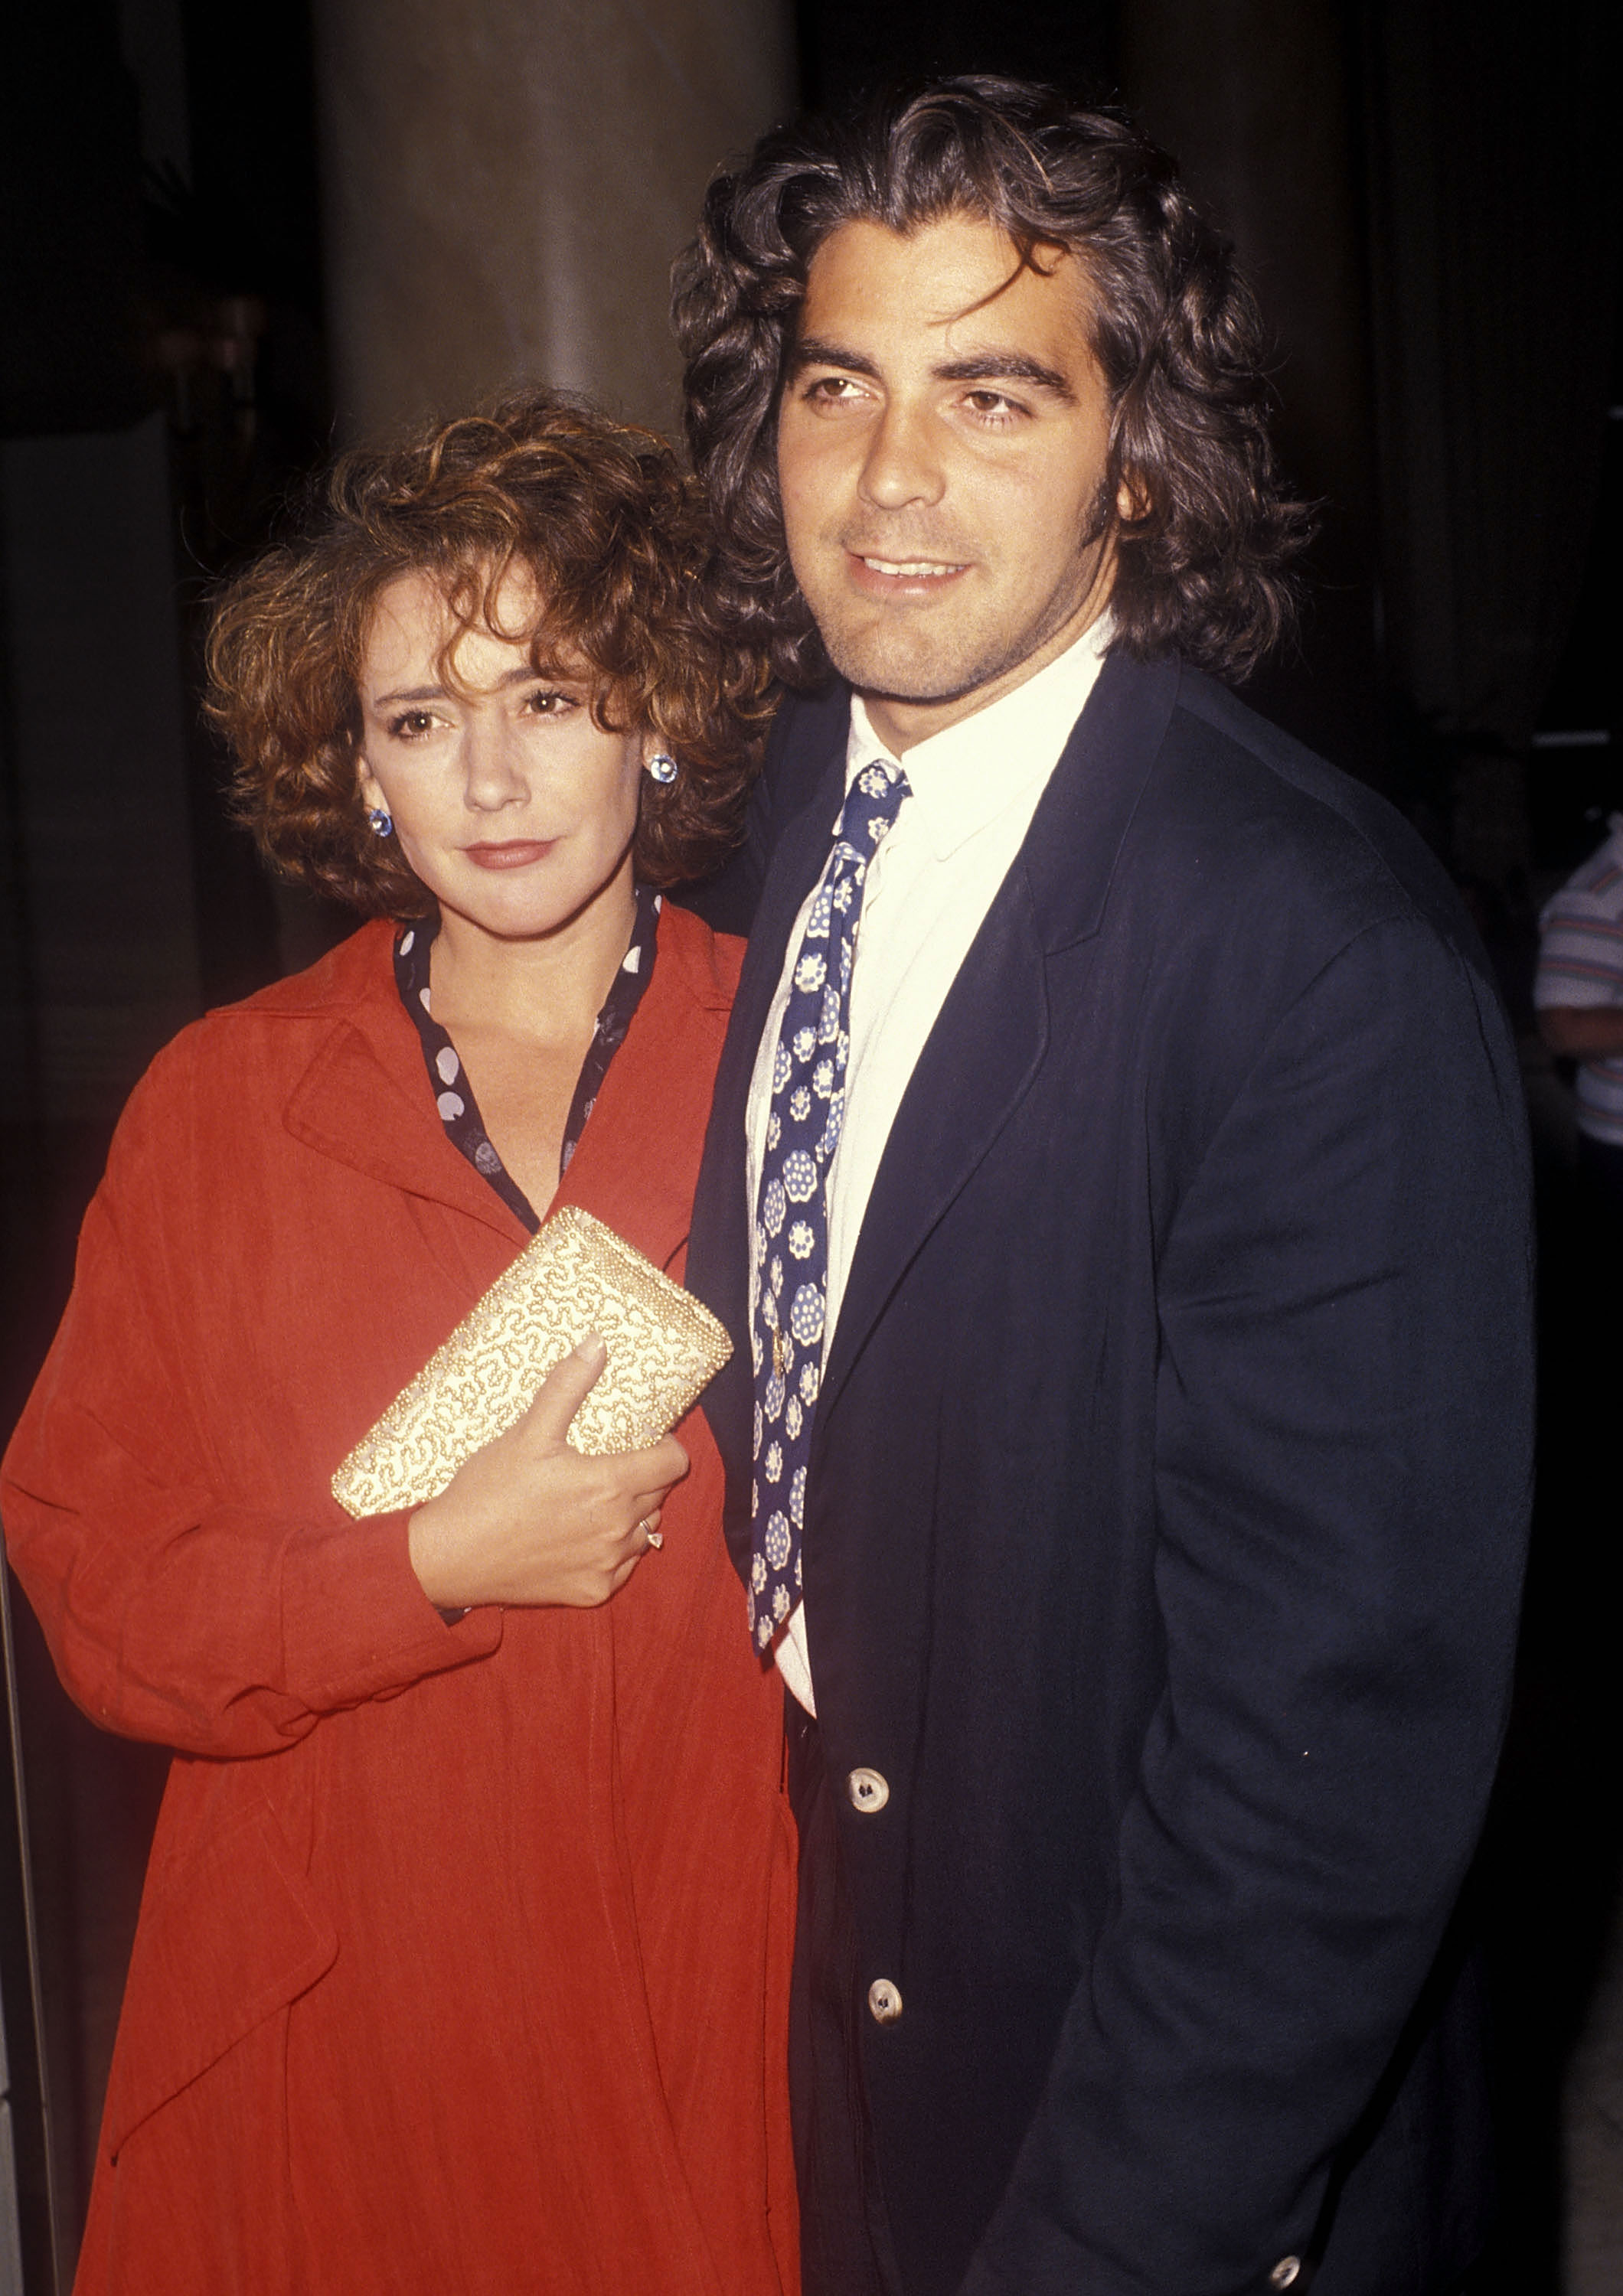 Talia Balsam and George Clooney at the ABC Television Affiliates Party in Los Angeles, California on June 14, 1990 | Source: Getty Images